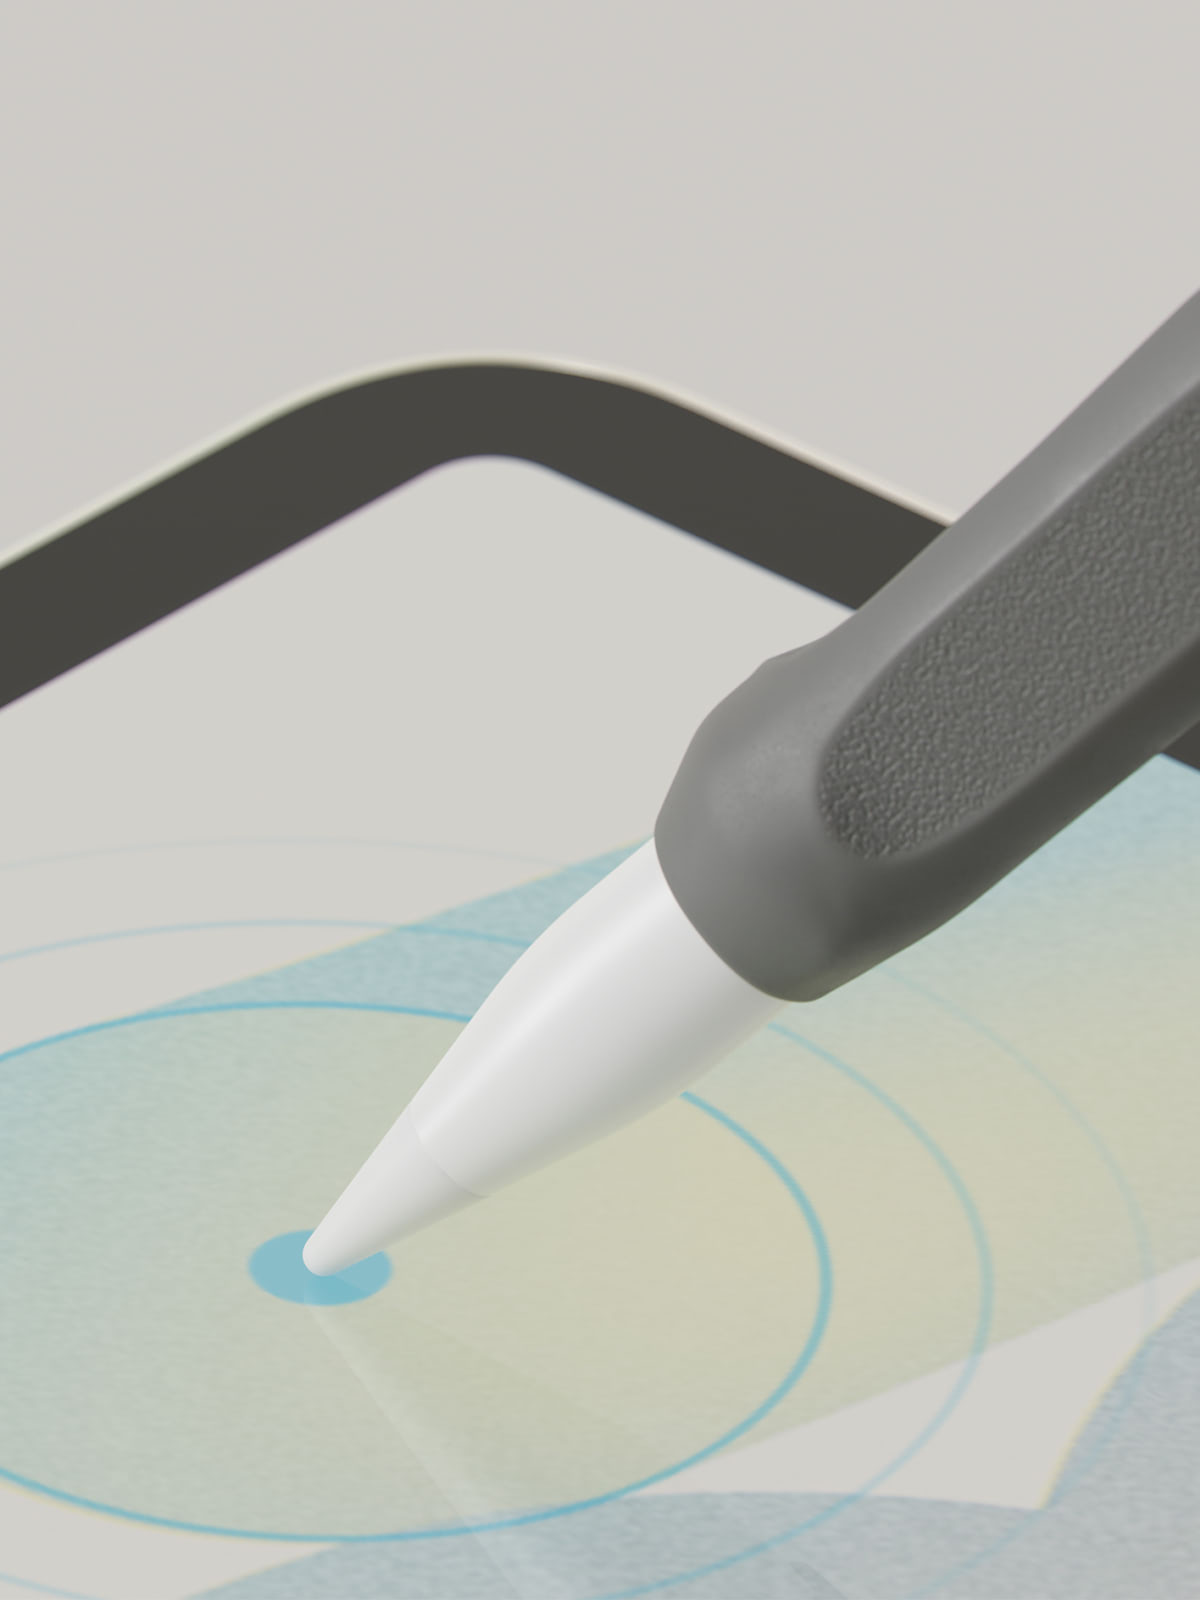 A close-up of an Apple Pencil touching a screen.  Paperlike’s Pencil Grips are attached to the Apple Pencil.